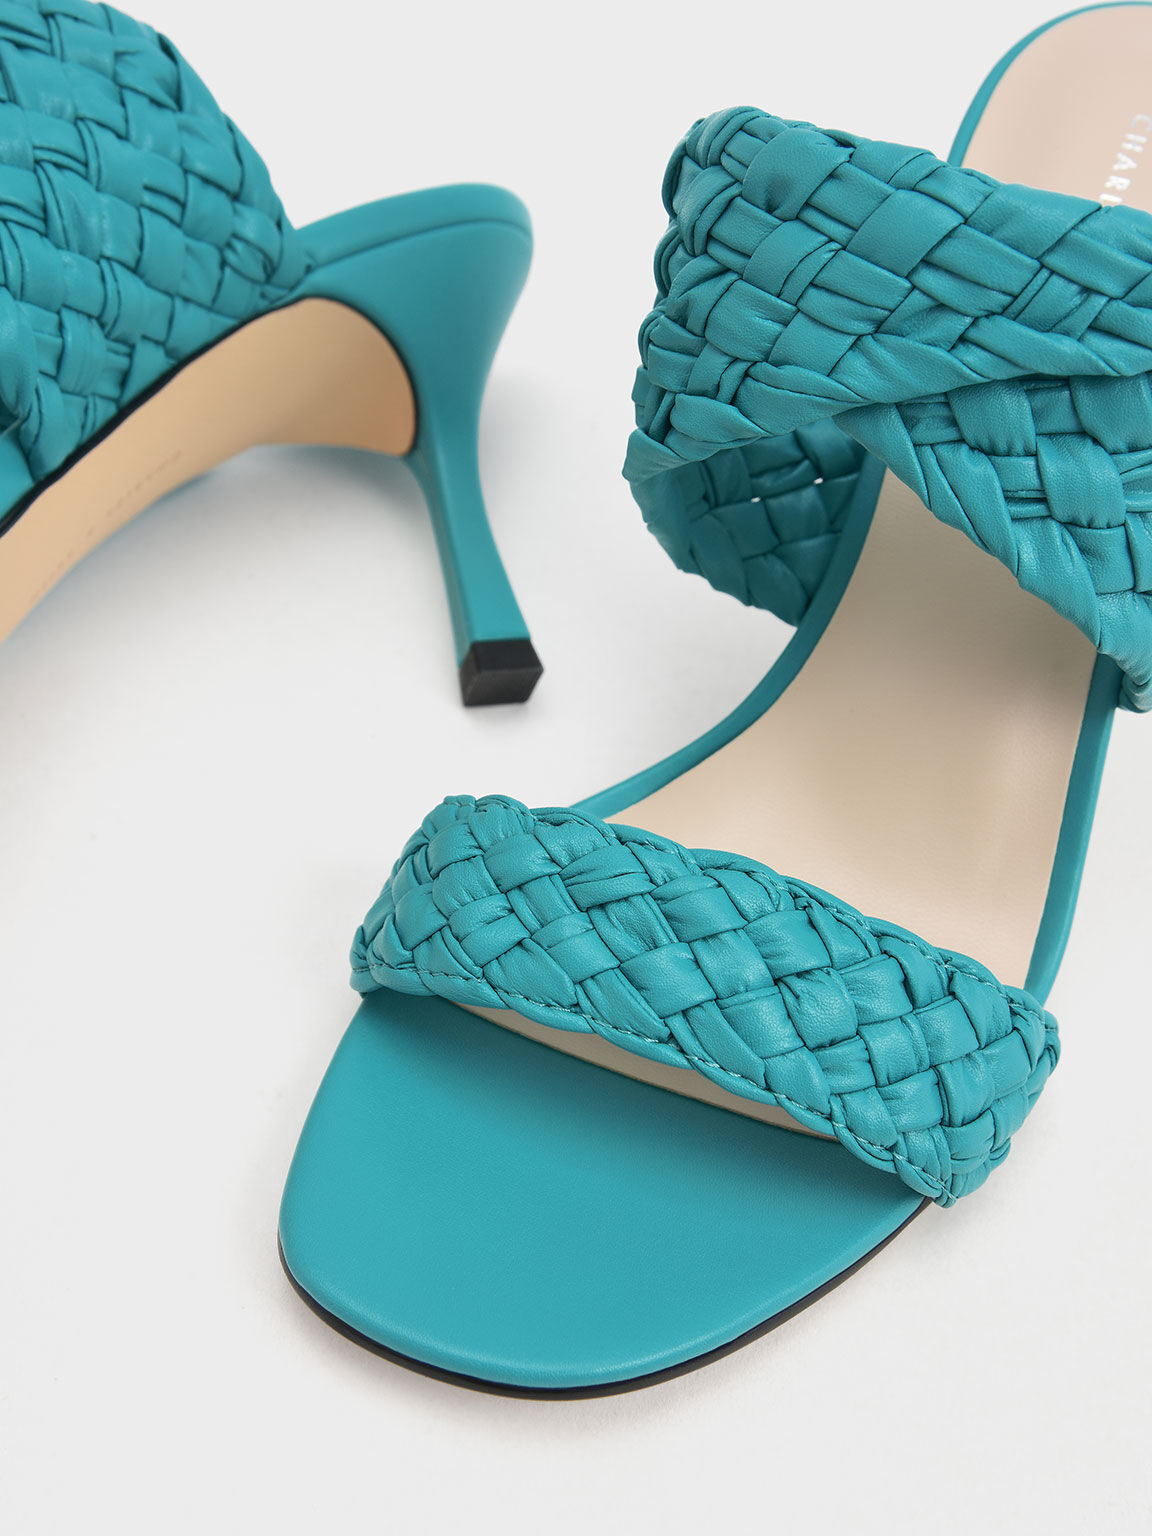 Double Strap Woven Heeled Mules, Turquoise, hi-res